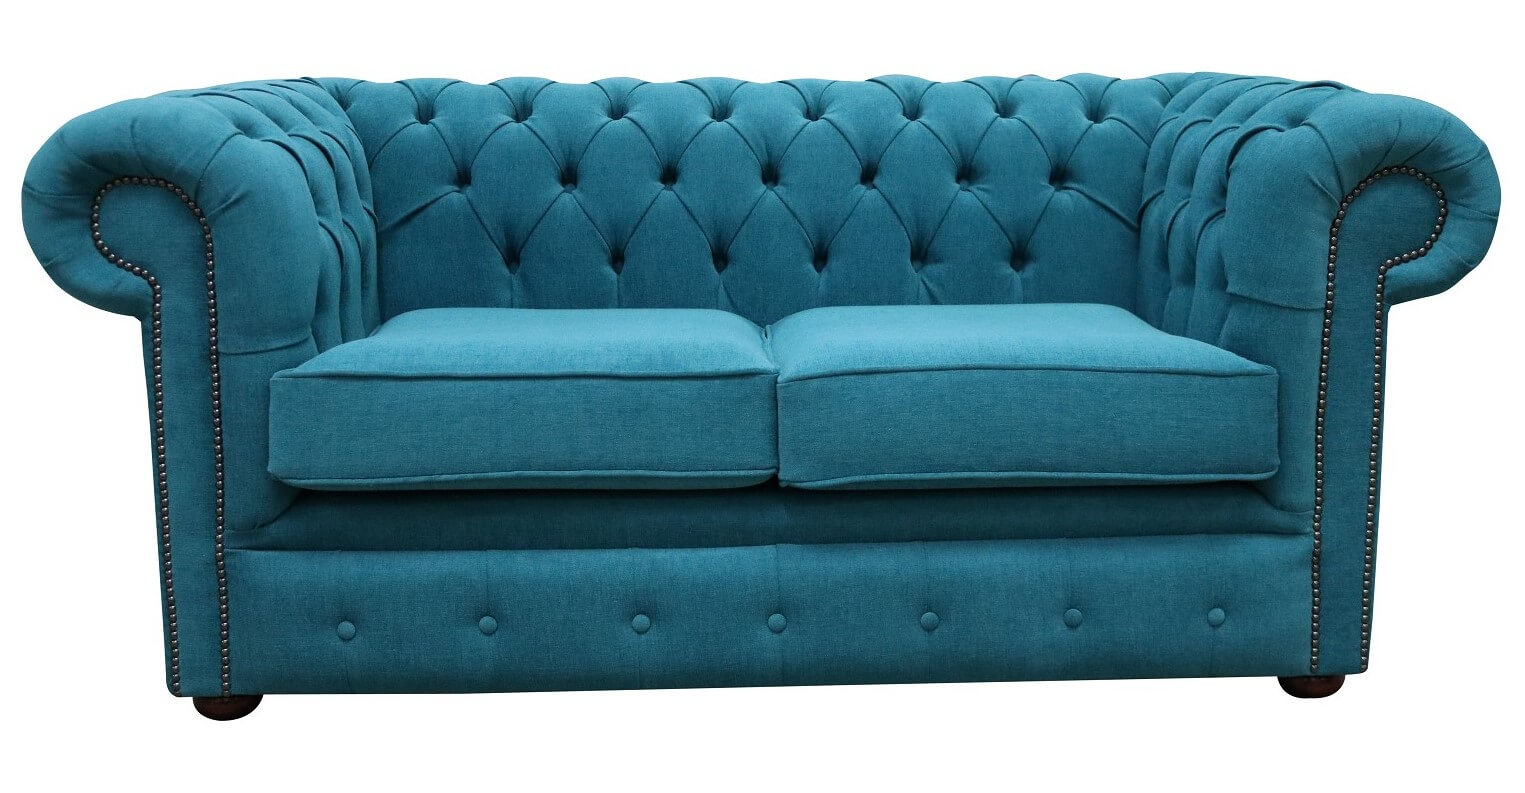 Authentic Elegance Unveiled Identifying the True Essence of a Chesterfield Sofa  %Post Title